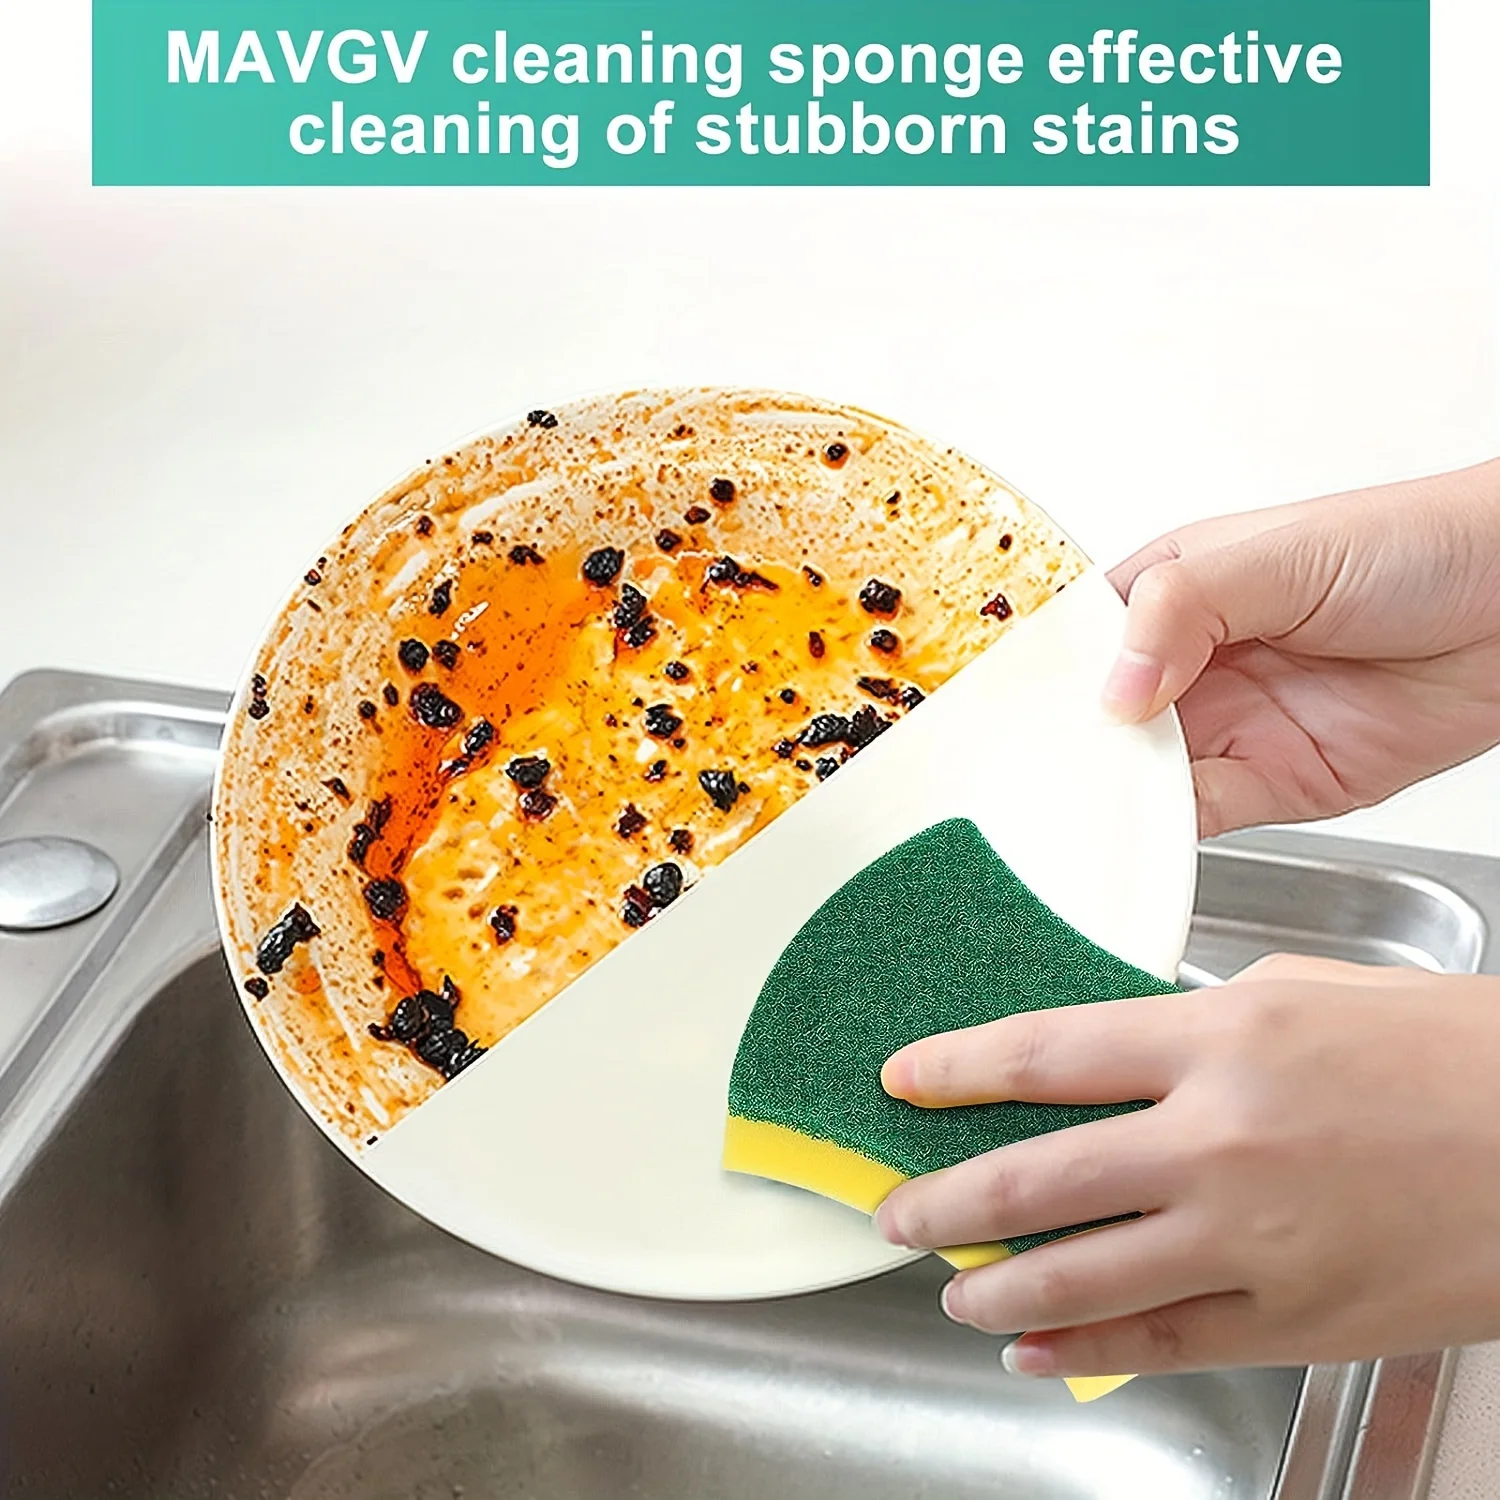 https://ae01.alicdn.com/kf/Seee52ef638d244eeb21071a4e15a2ee3K/24pcs-Kitchen-Cleaning-Sponges-Eco-Non-Scratch-for-Dish-Scouring-Pad-and-Table-Lazy-Water-Absorption.jpg